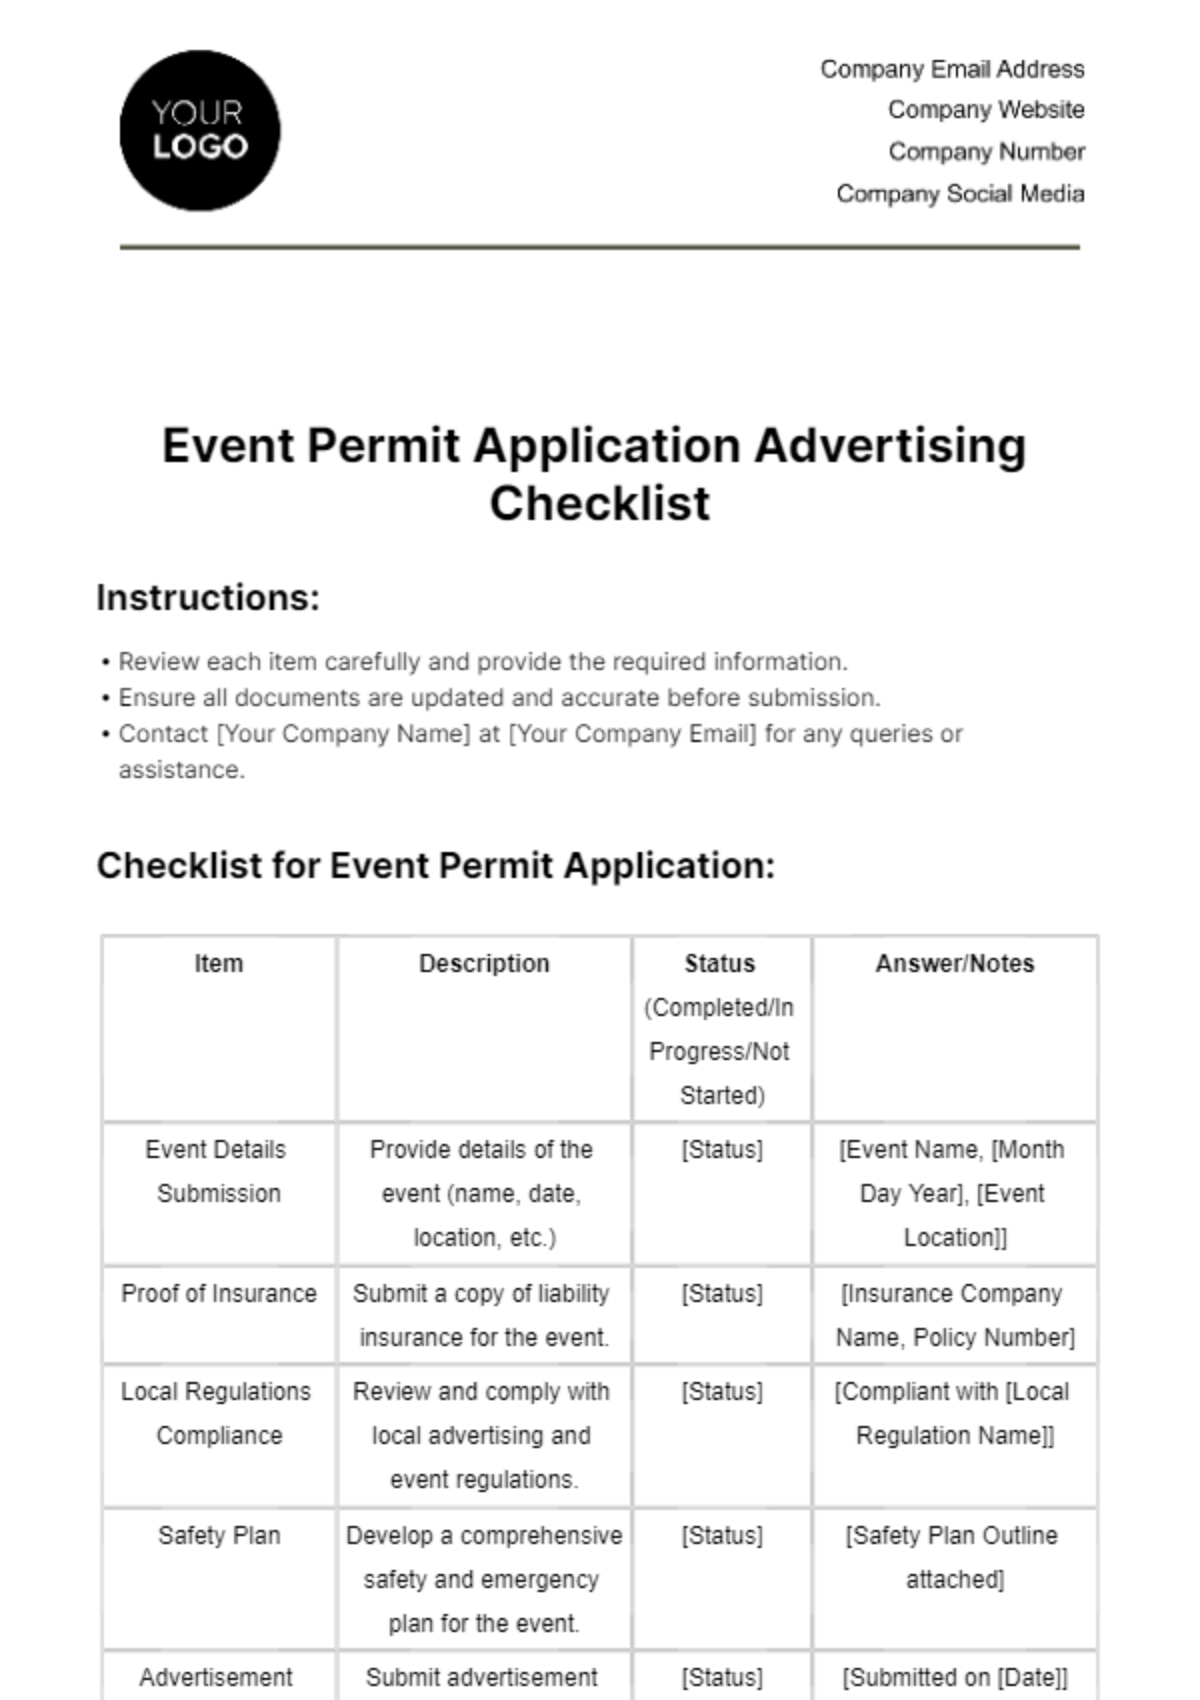 Event Permit Application Advertising Checklist Template